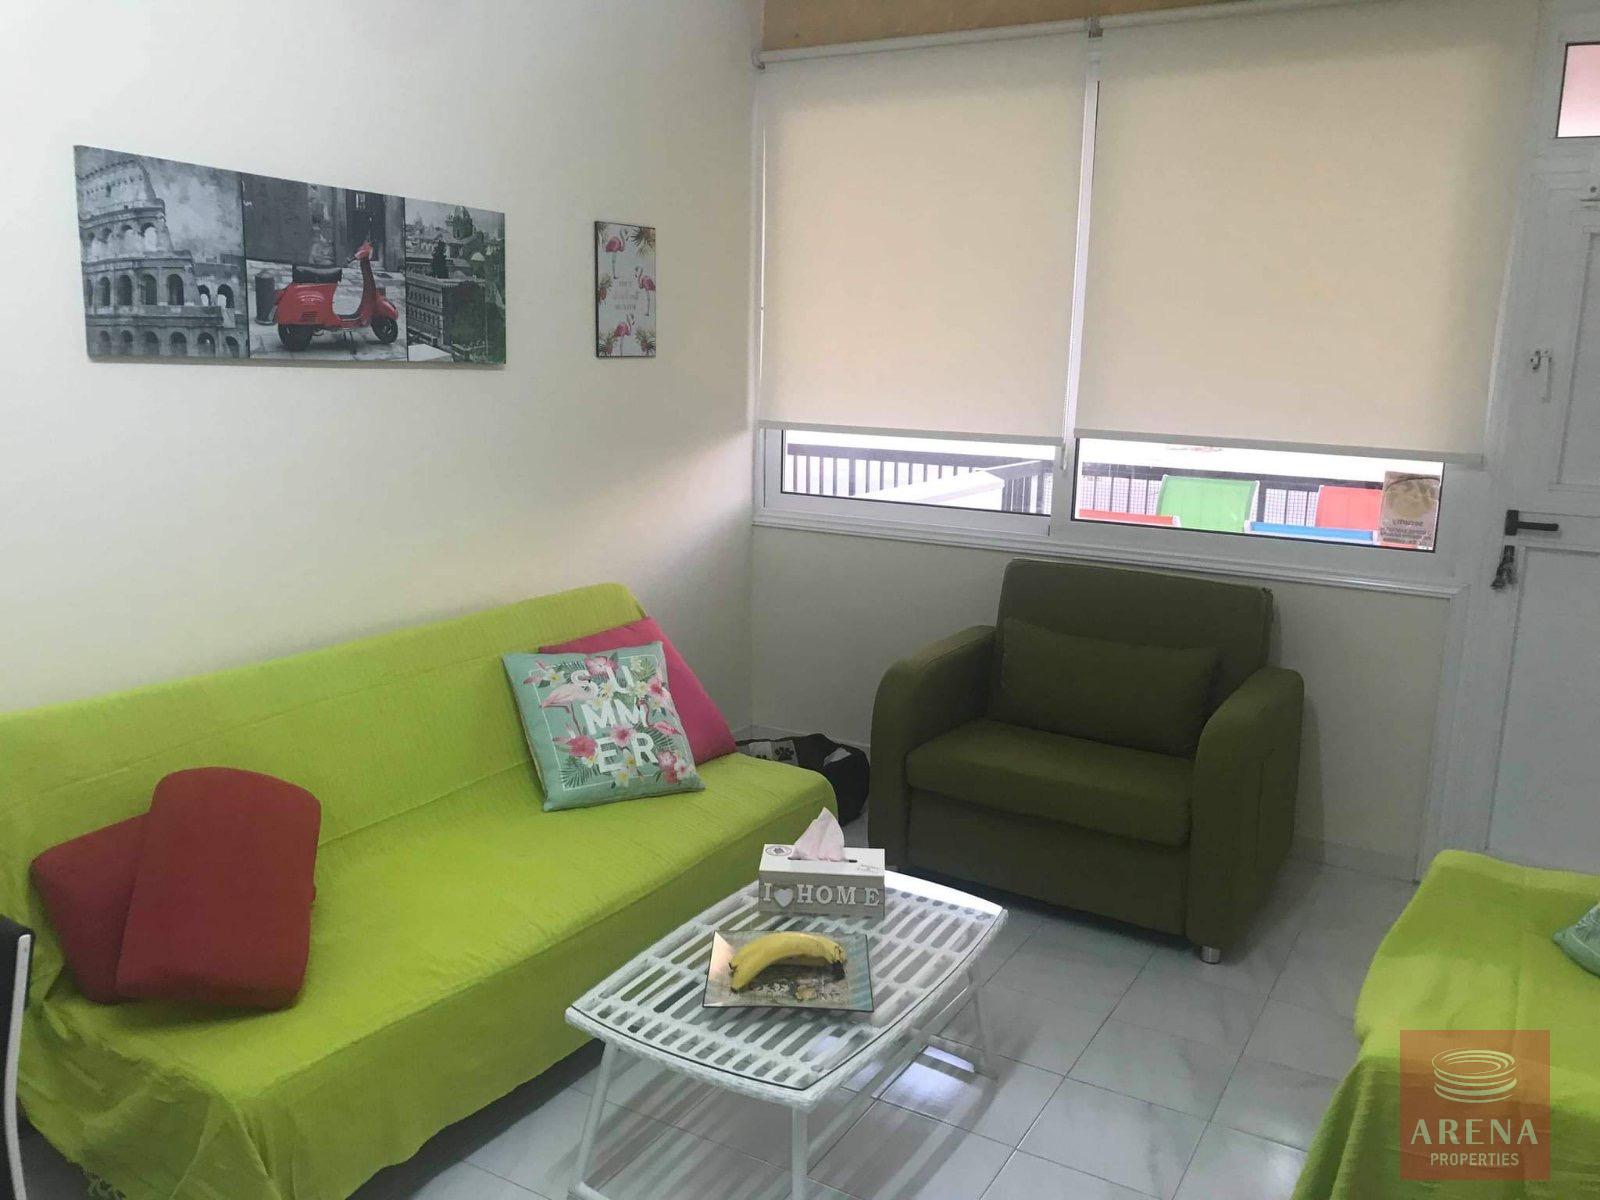 2 bed townhouse in Kapparis - sitting area